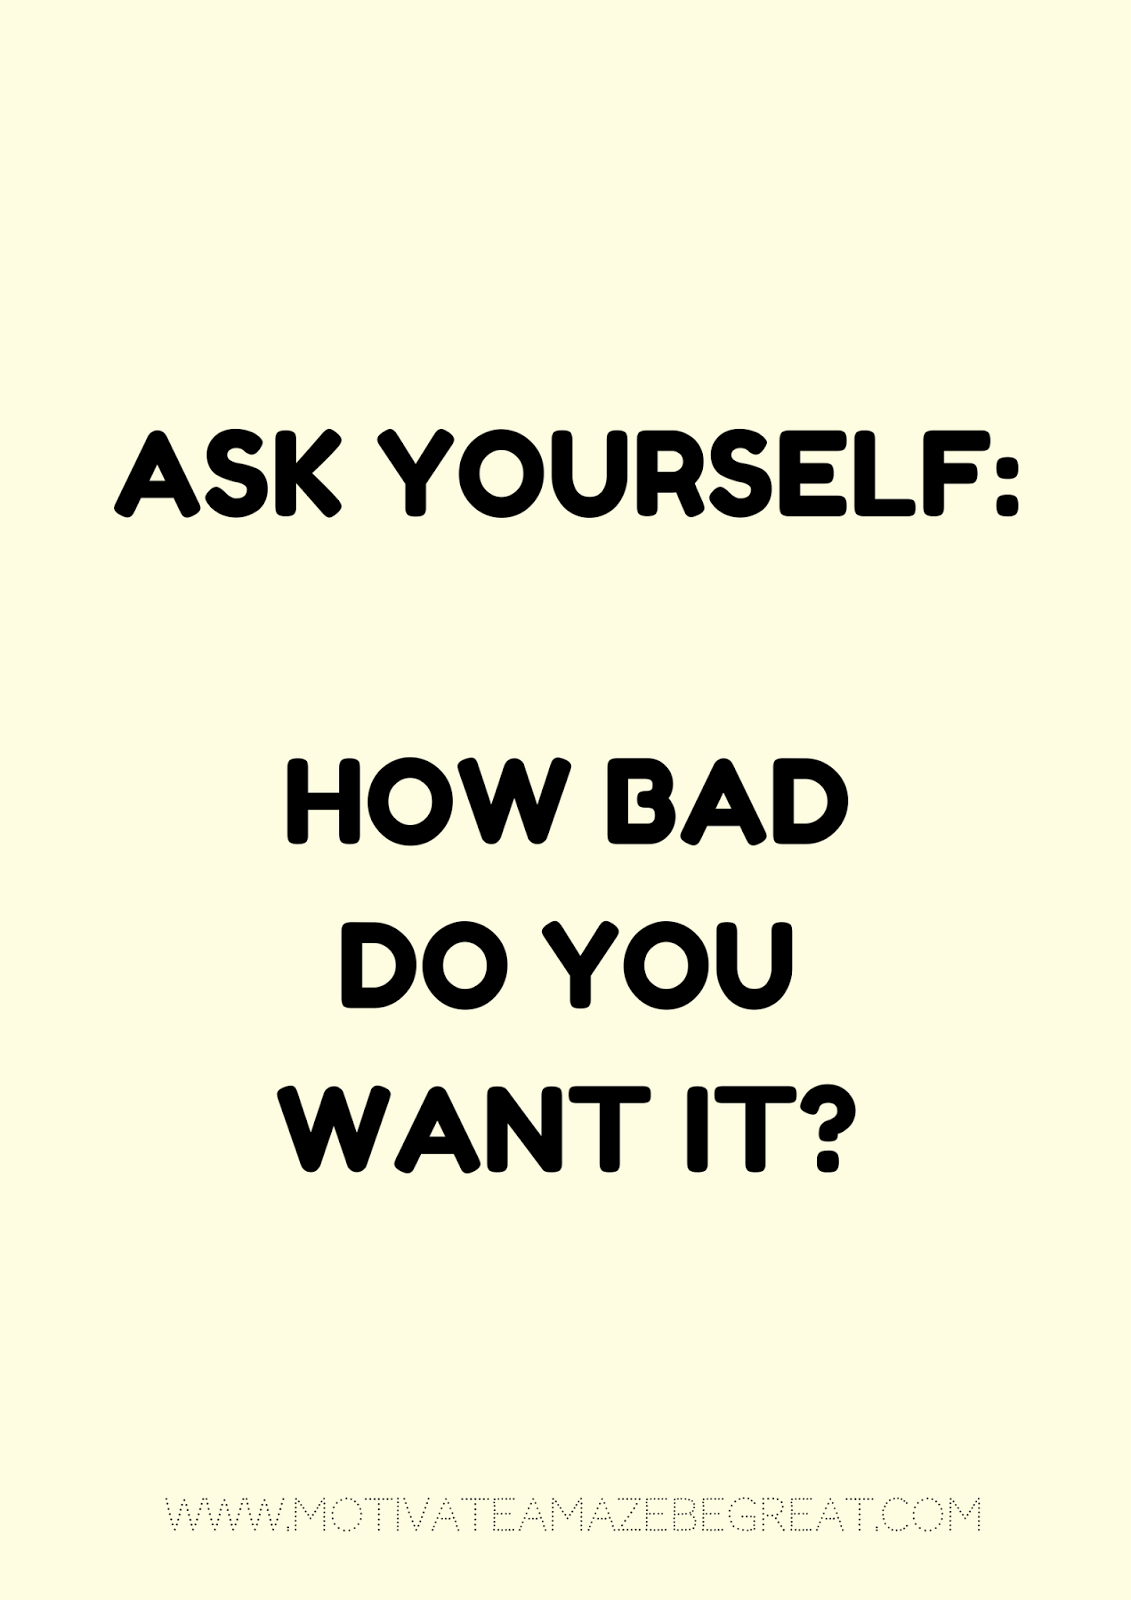 27 Self Motivation Quotes And Posters For Success "Ask yourself How bad do